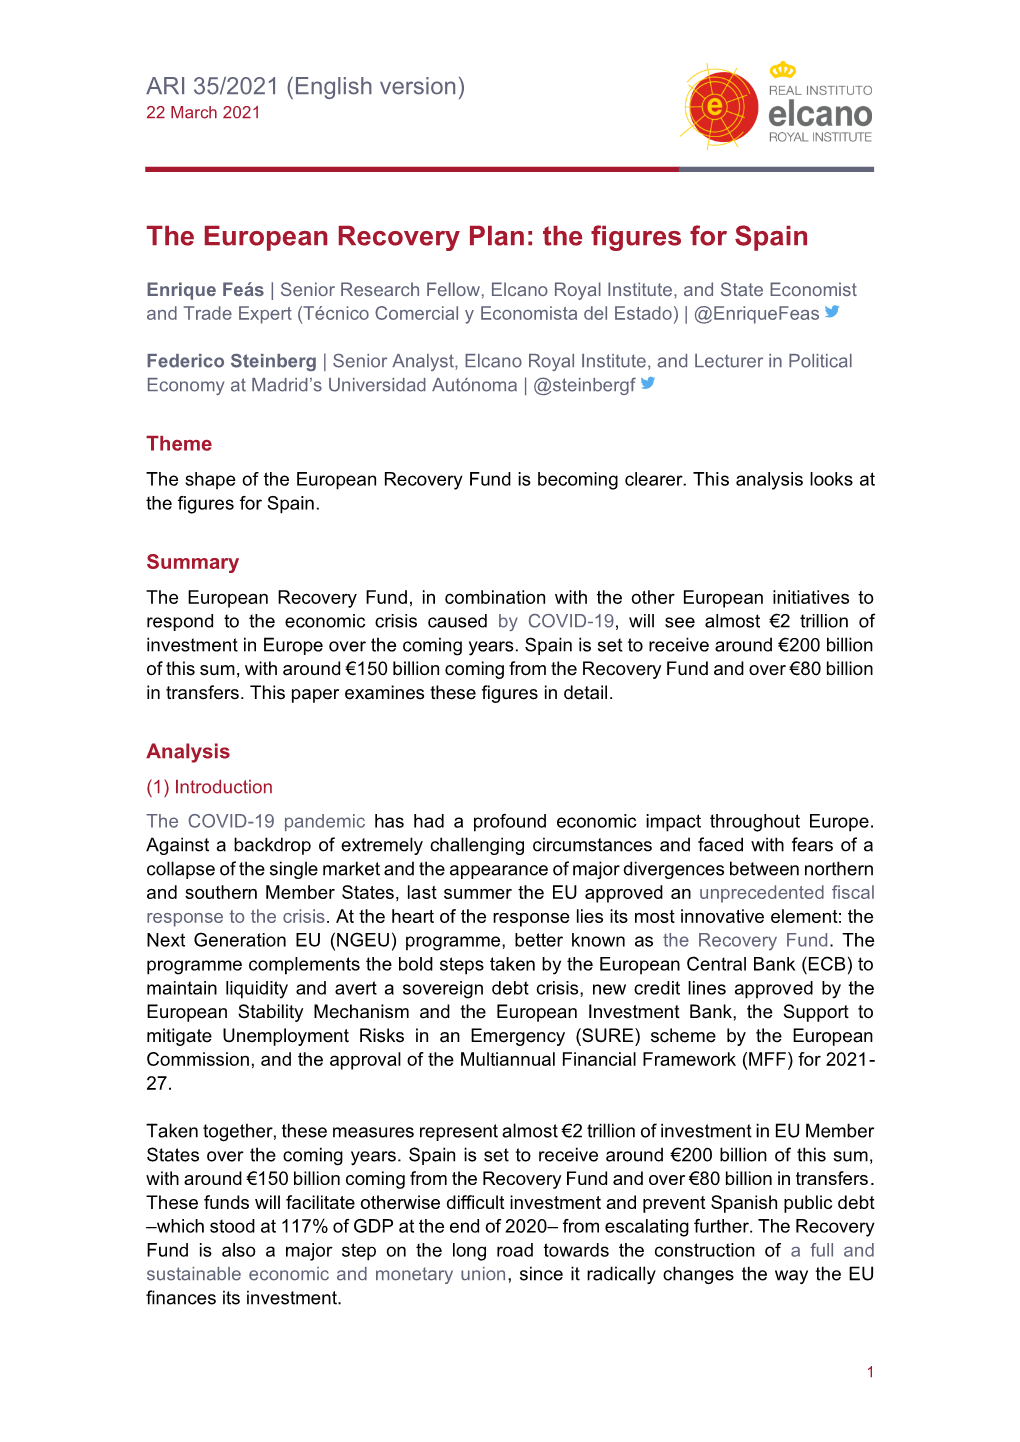 The European Recovery Plan: the Figures for Spain